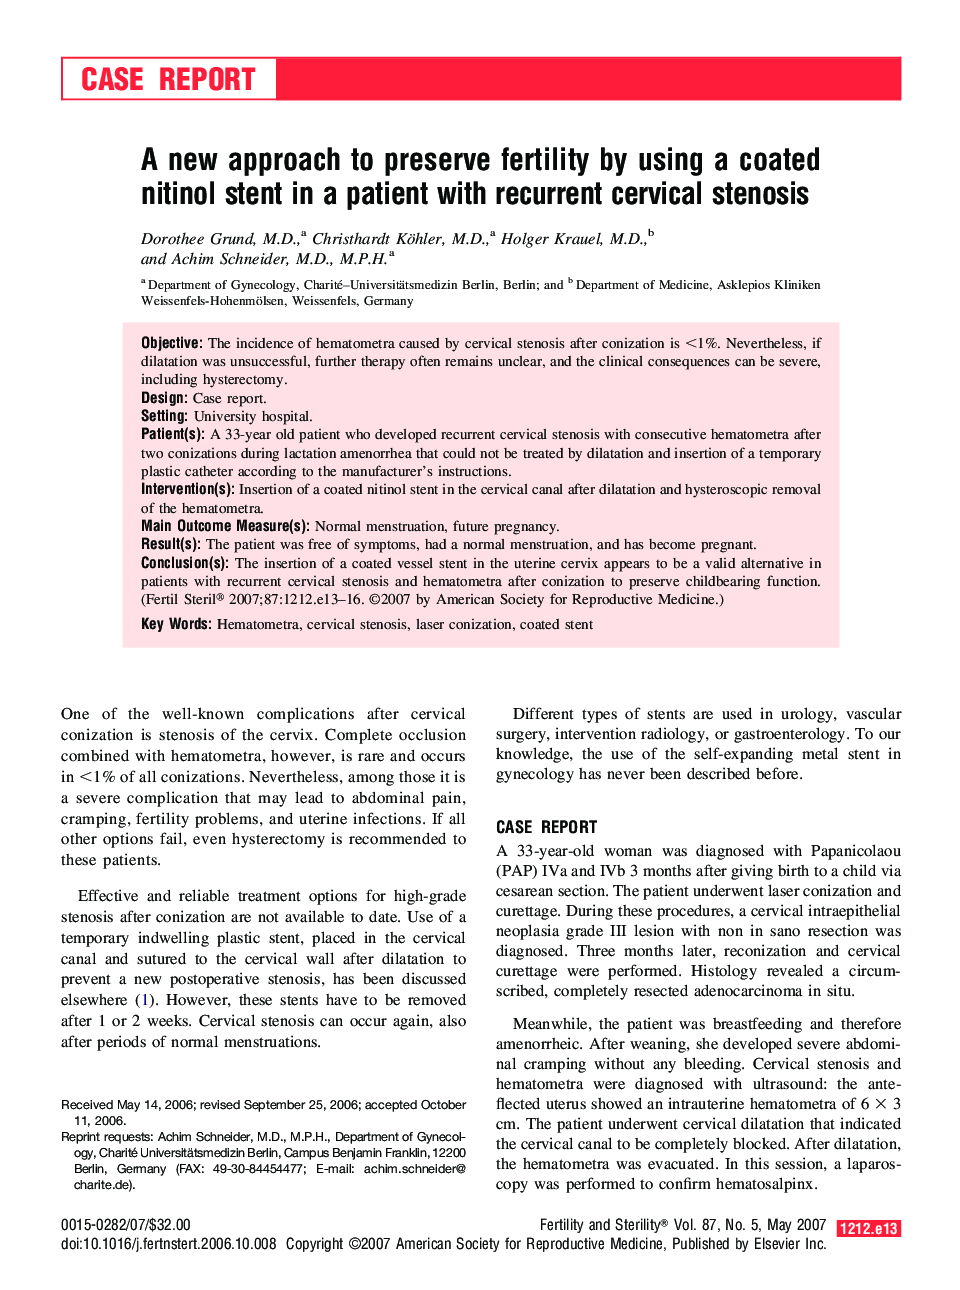 A new approach to preserve fertility by using a coated nitinol stent in a patient with recurrent cervical stenosis